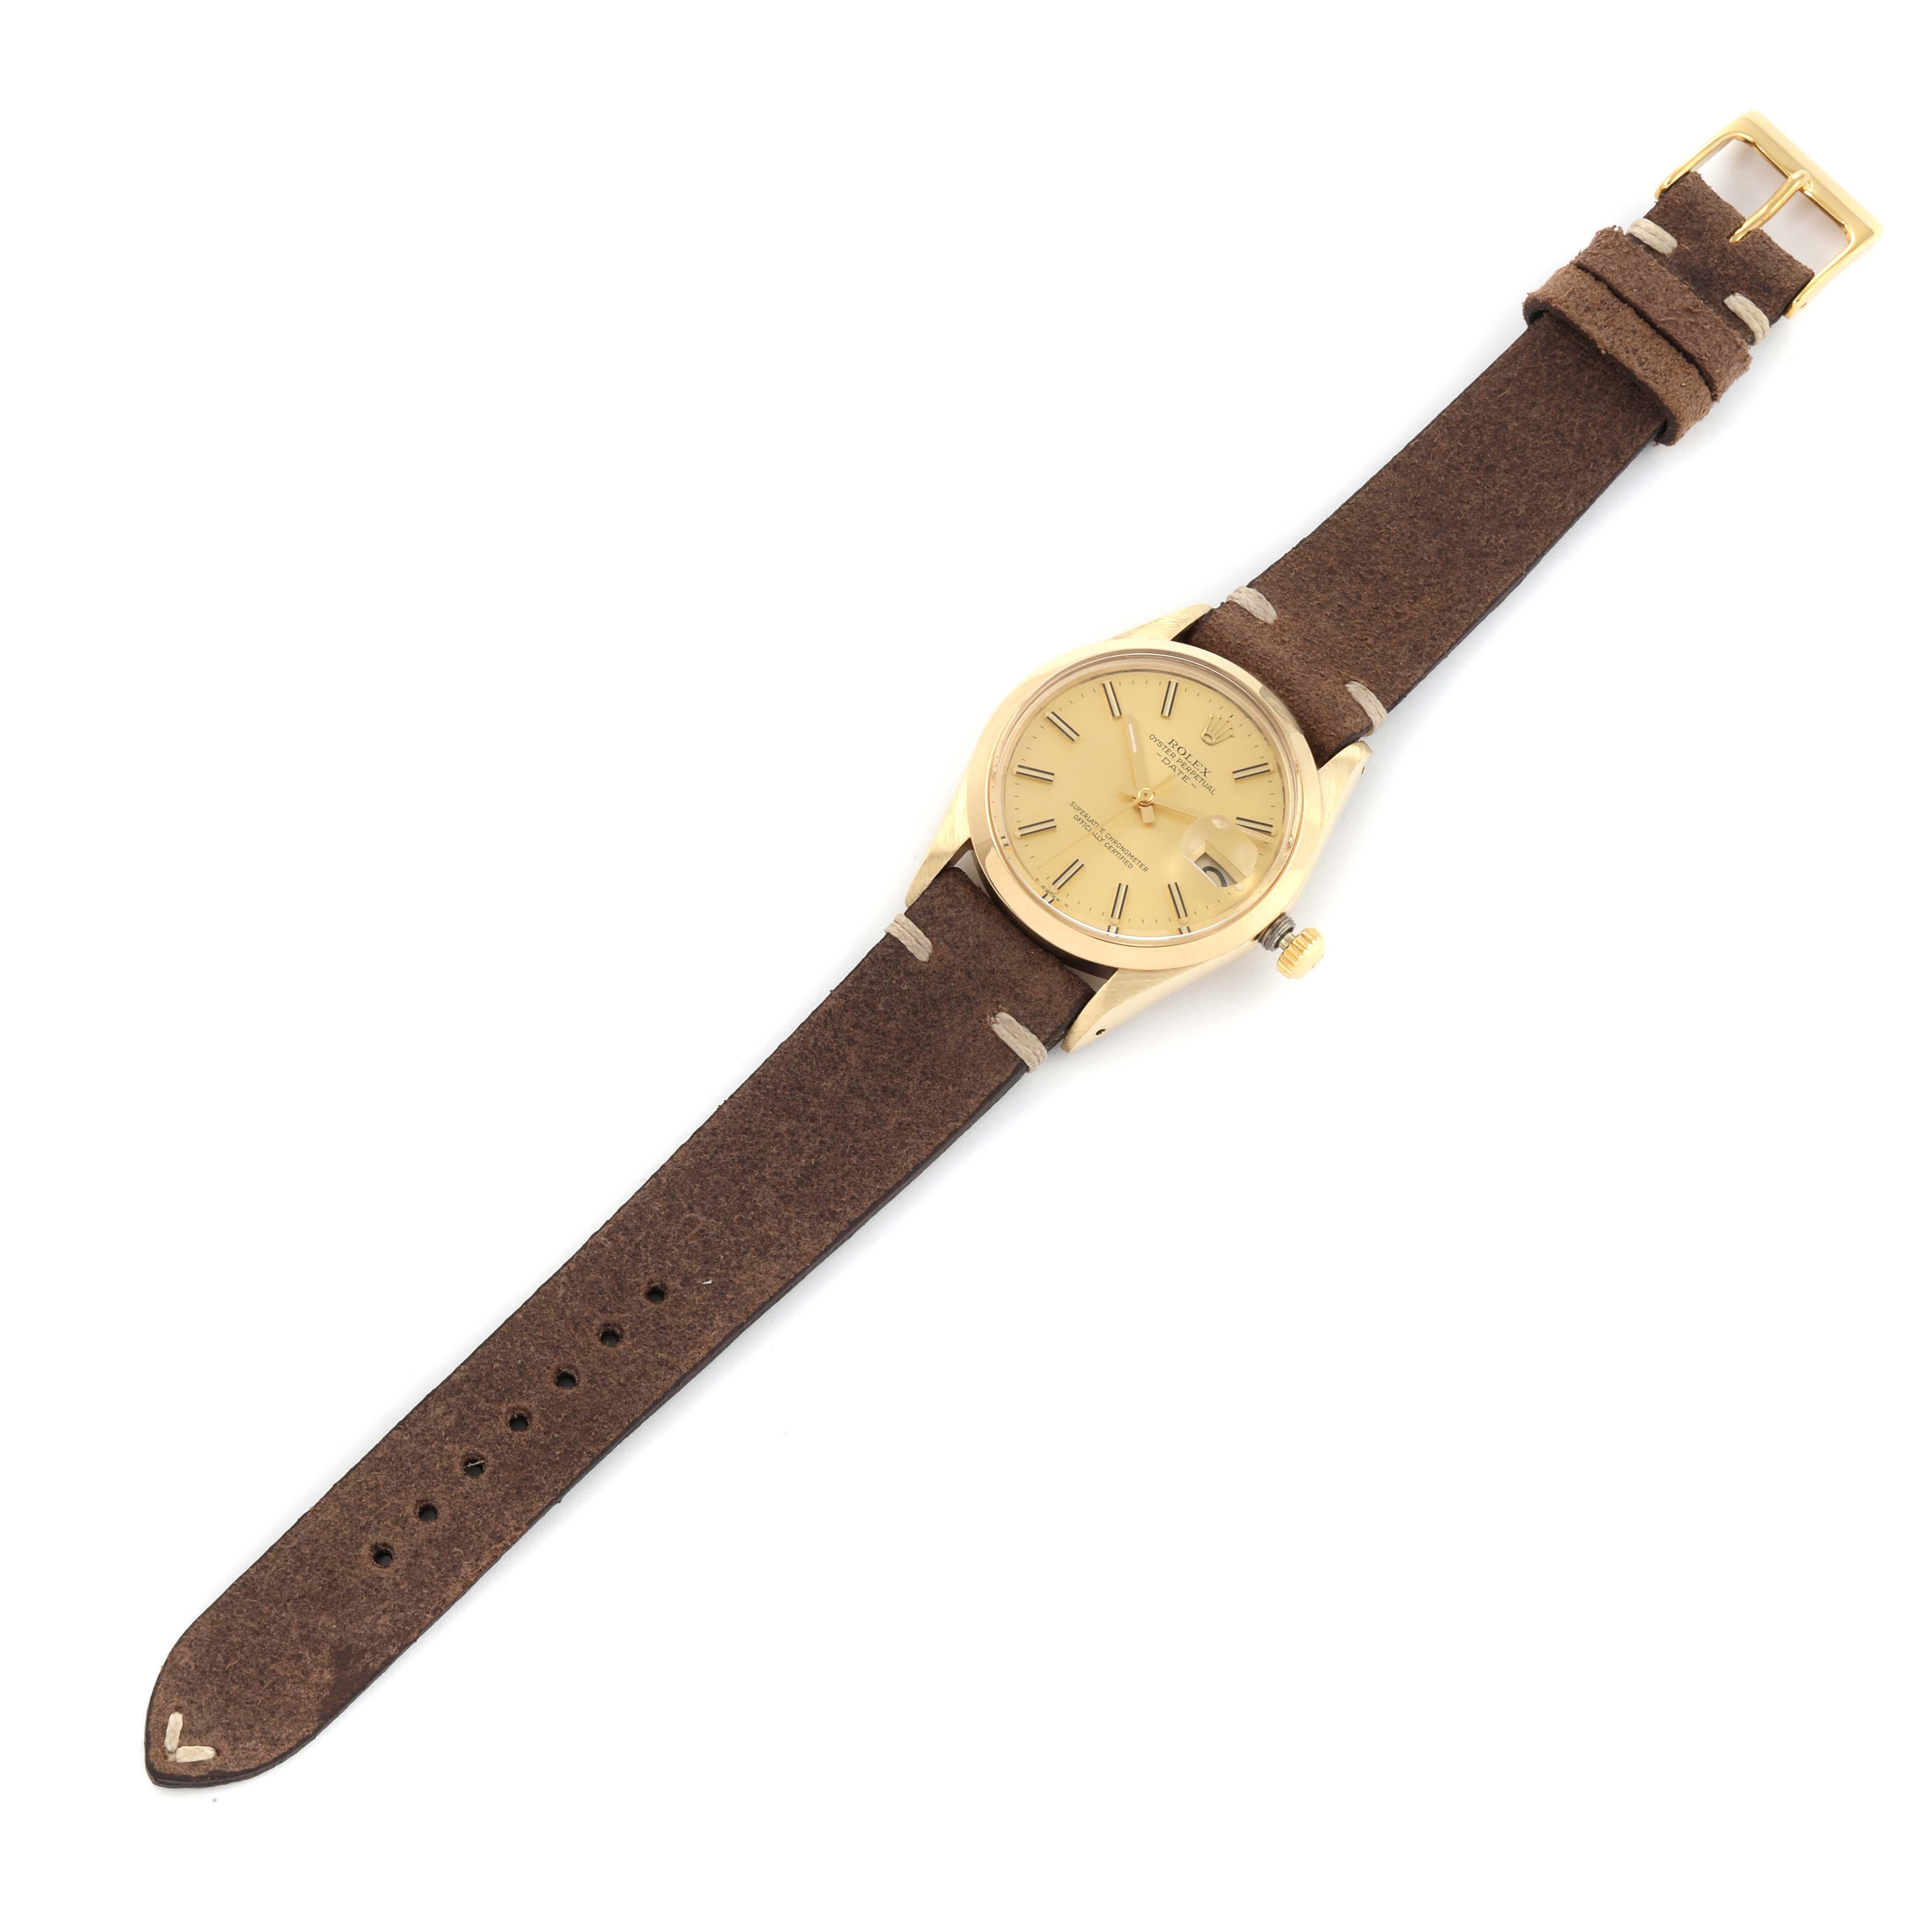 Rolex Date Yellow Gold Champagne Dial Leather Strap Vintage Mens Watch 15007 en vente 6